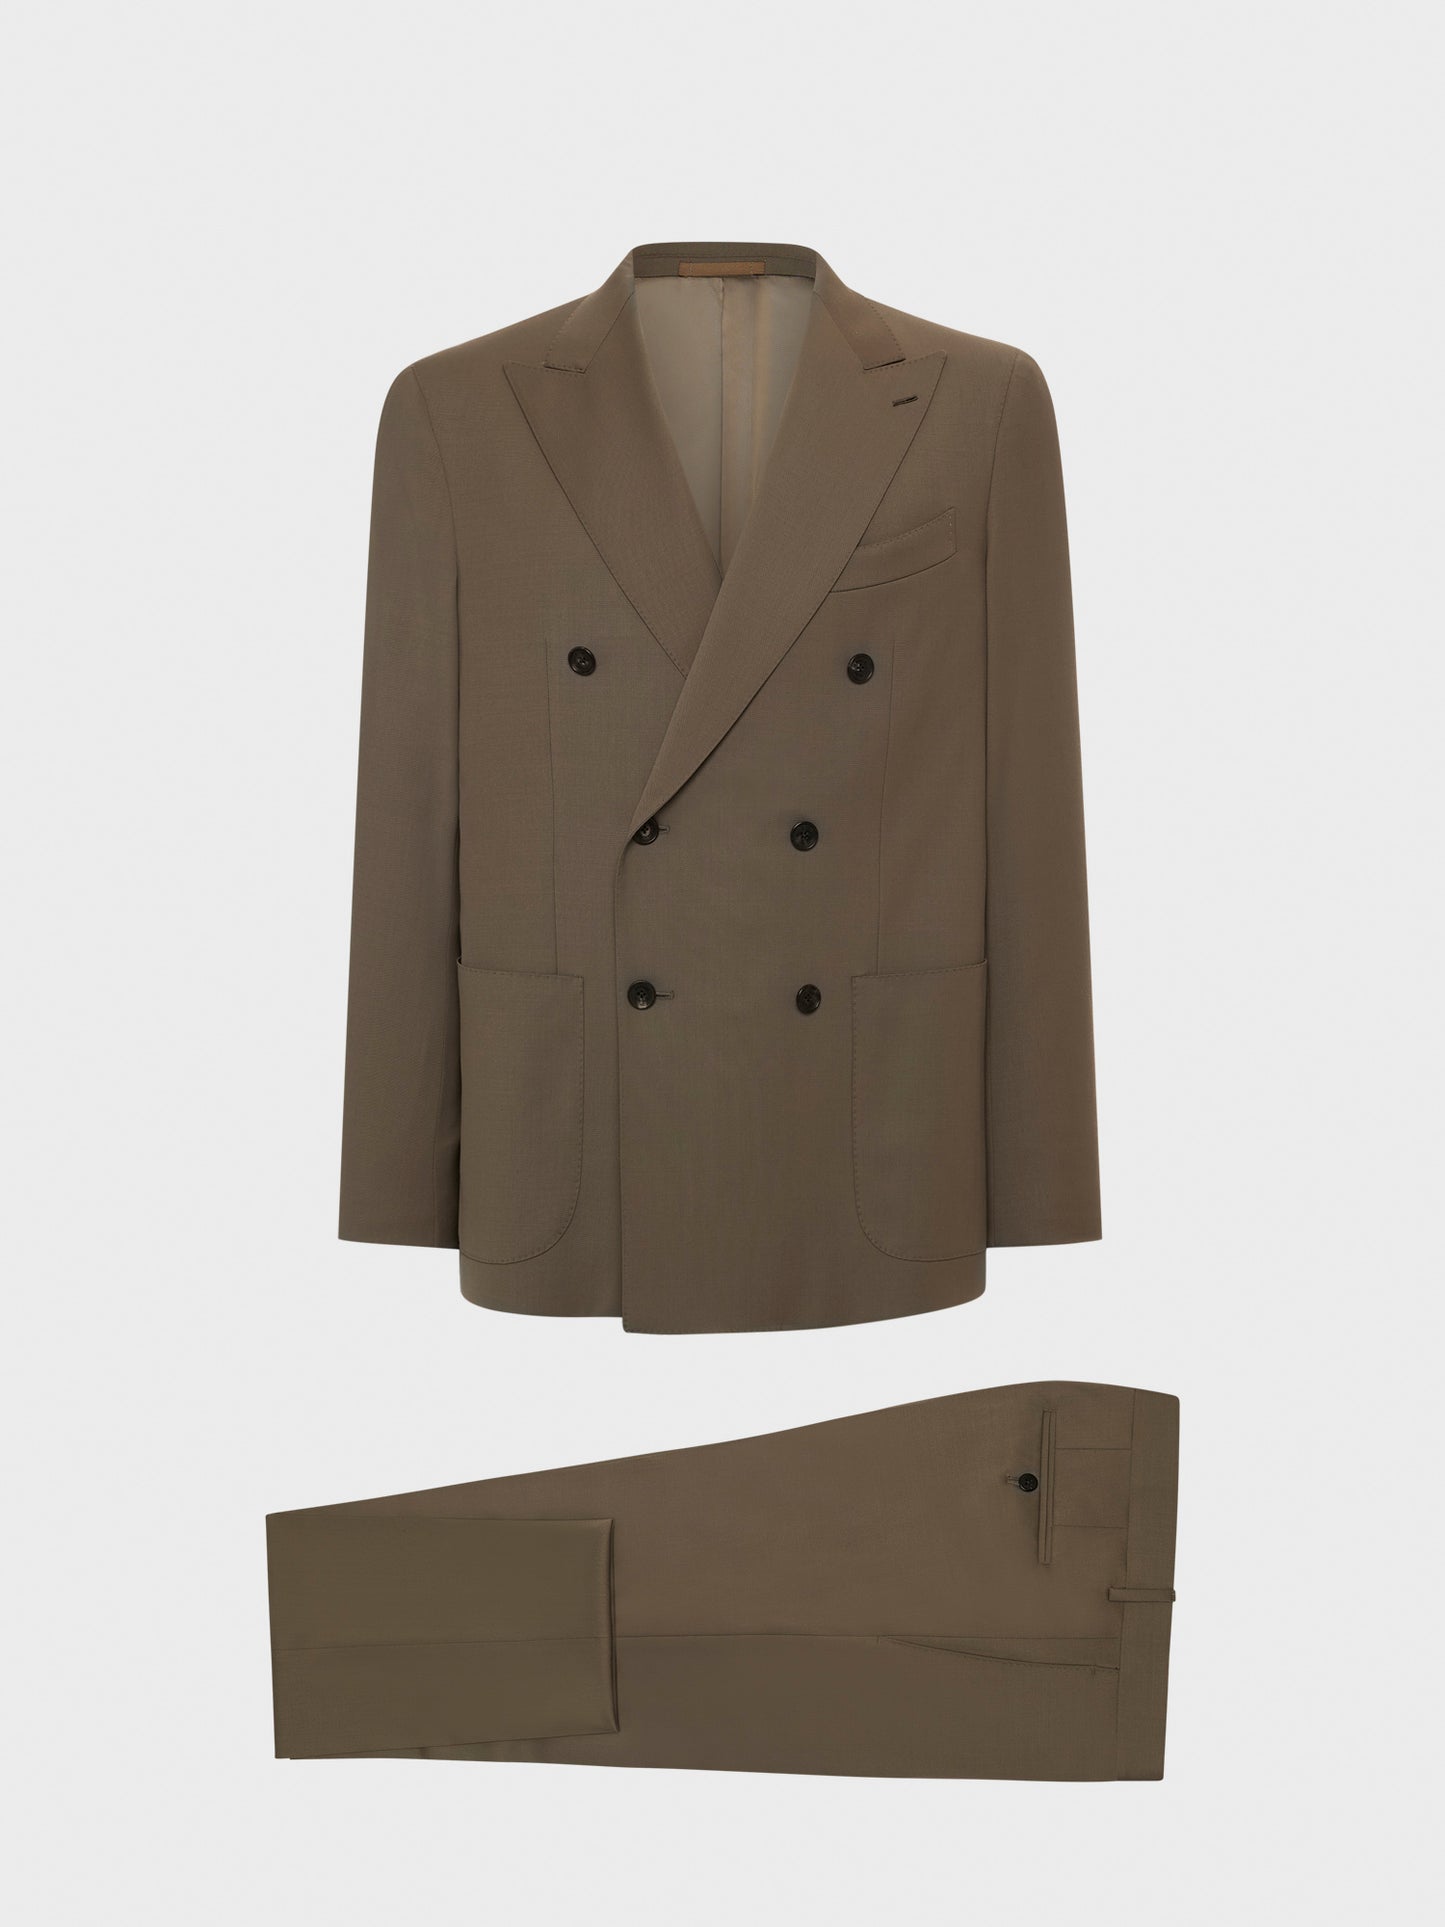 Aida double-breasted suit in brown wool